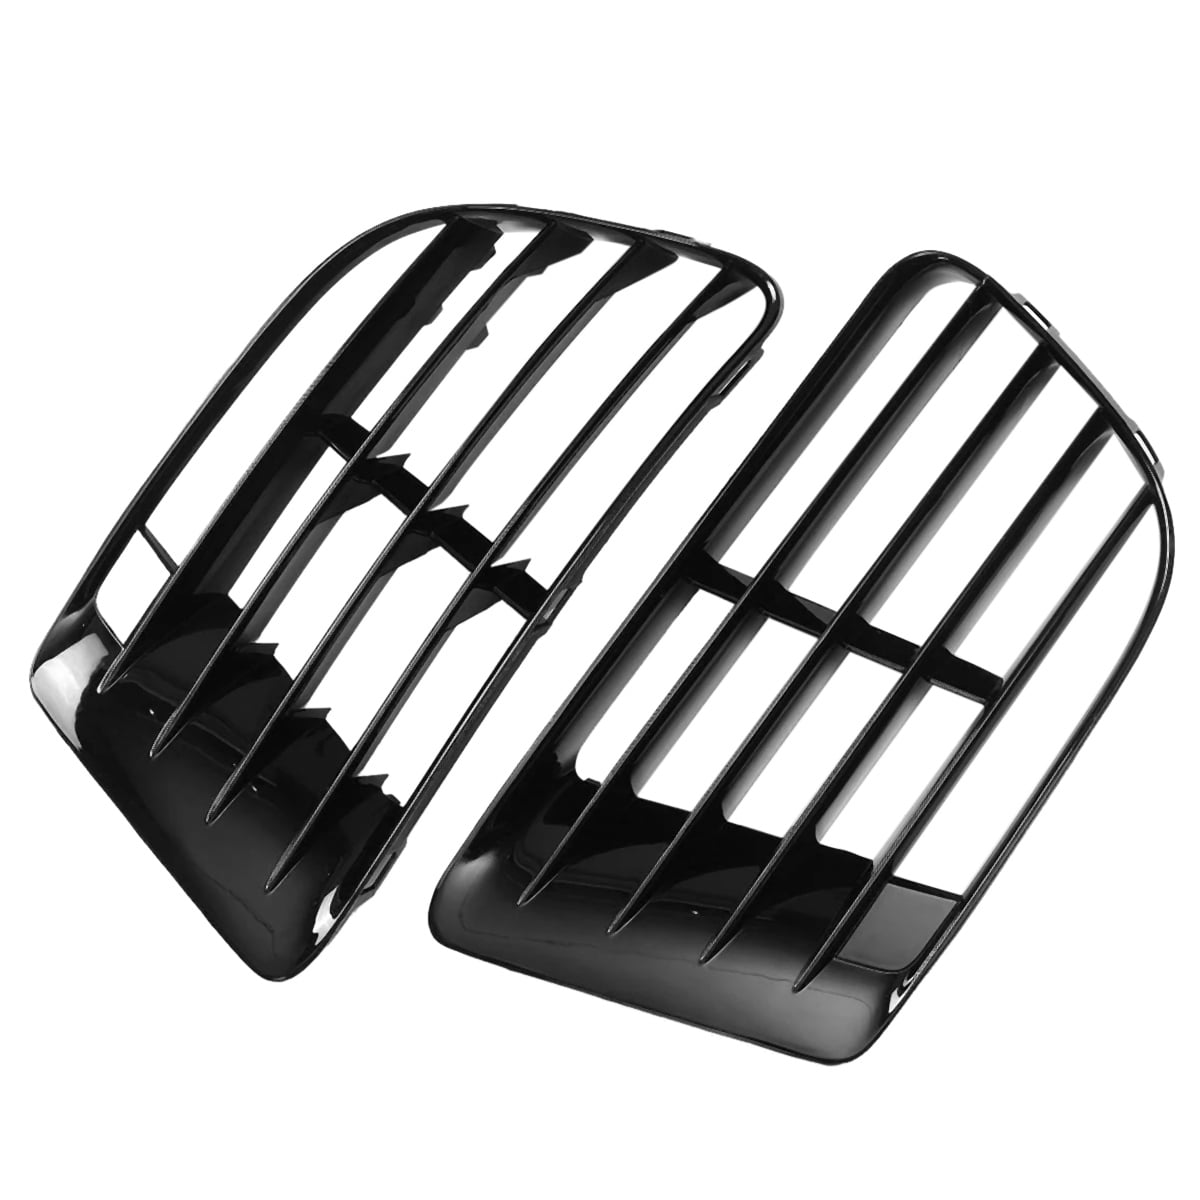 For Golf MK6 R R20 Look Fog Light Lower Bumper Grille Grill Cover ...